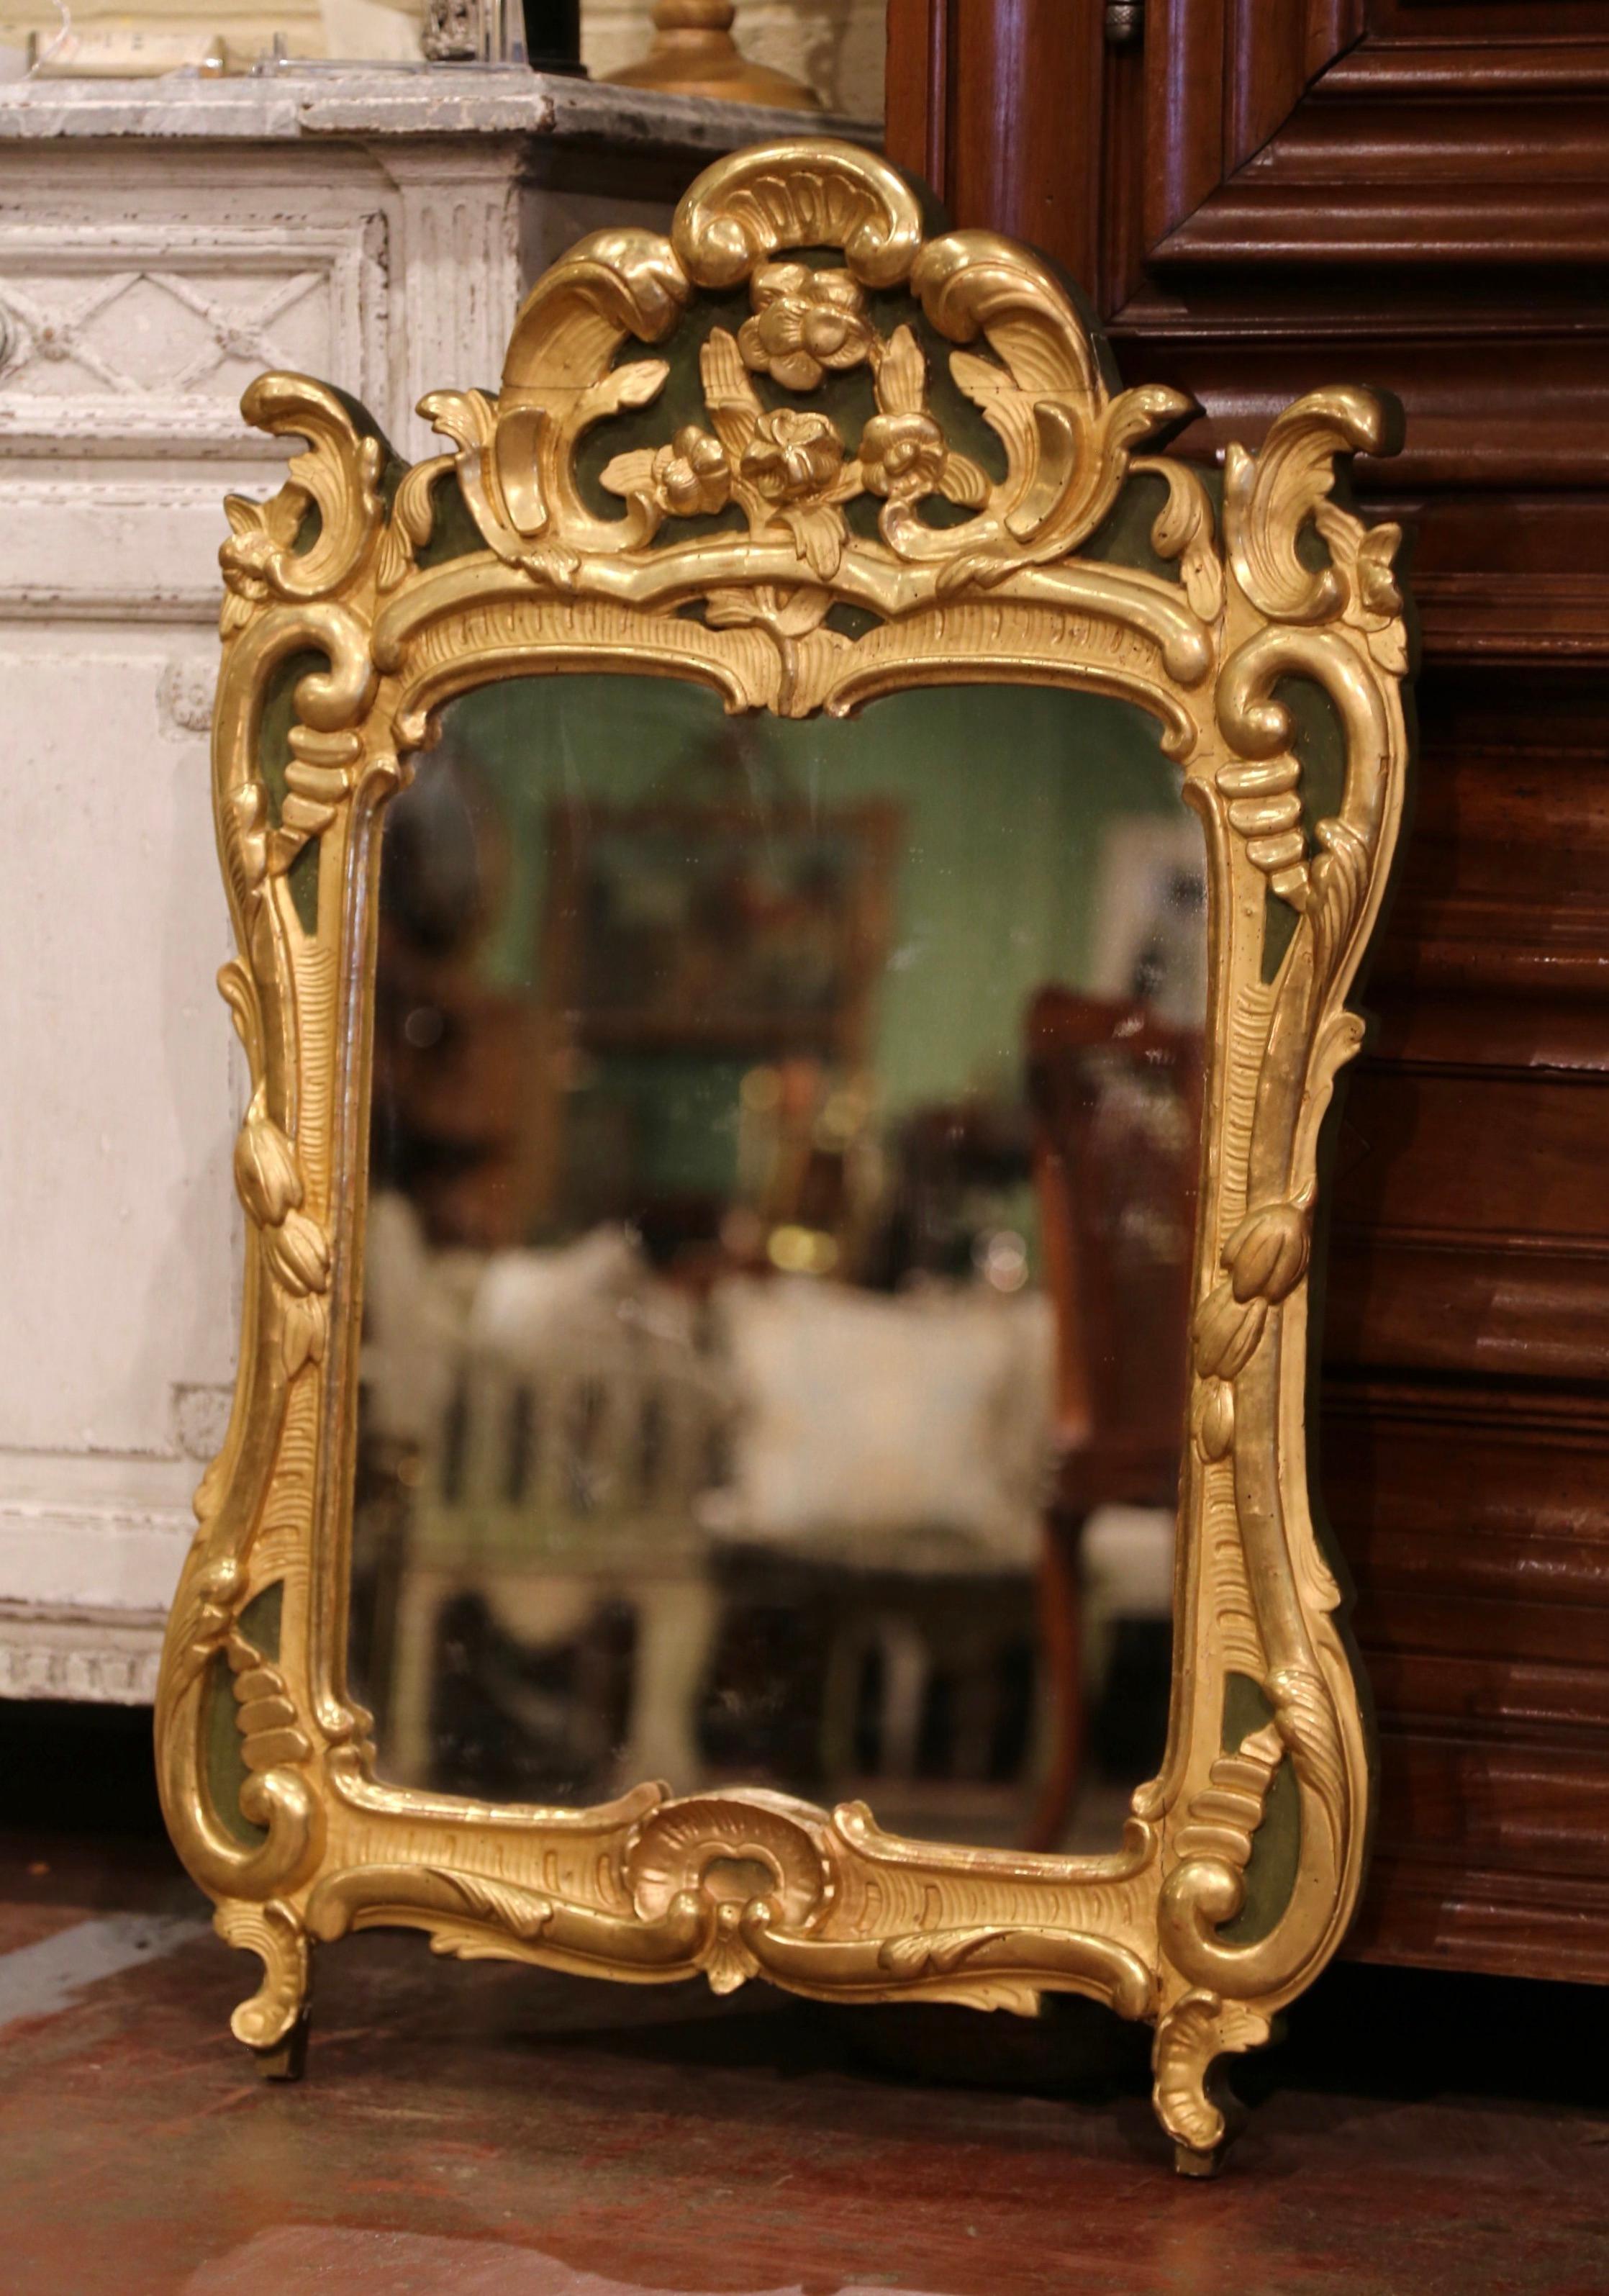 This elegant, antique gilt mirror would make a charming addition to an entryway or powder room. Crafted in Southern France, circa 1780, the rectangular Provincial mirror is heavily carved and exemplifies the design elements of the Rococo and Baroque